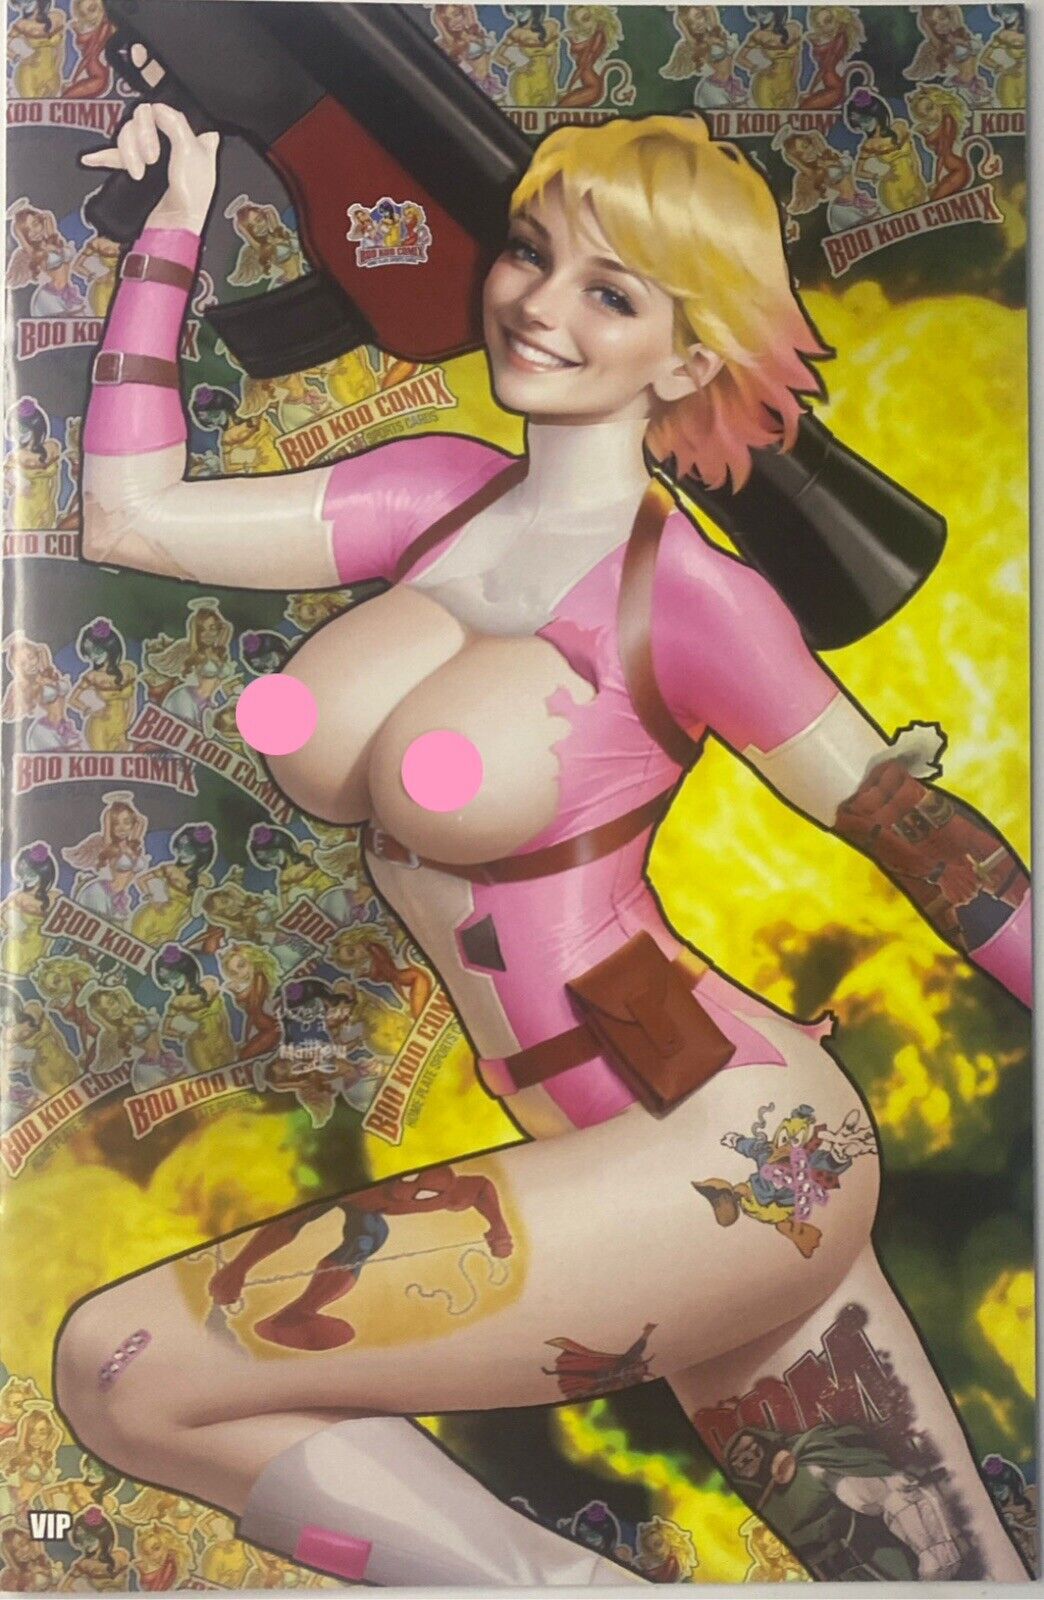 Bear Babes Preview Edition Gwenpool Naughty Topless VIP Variant Cover